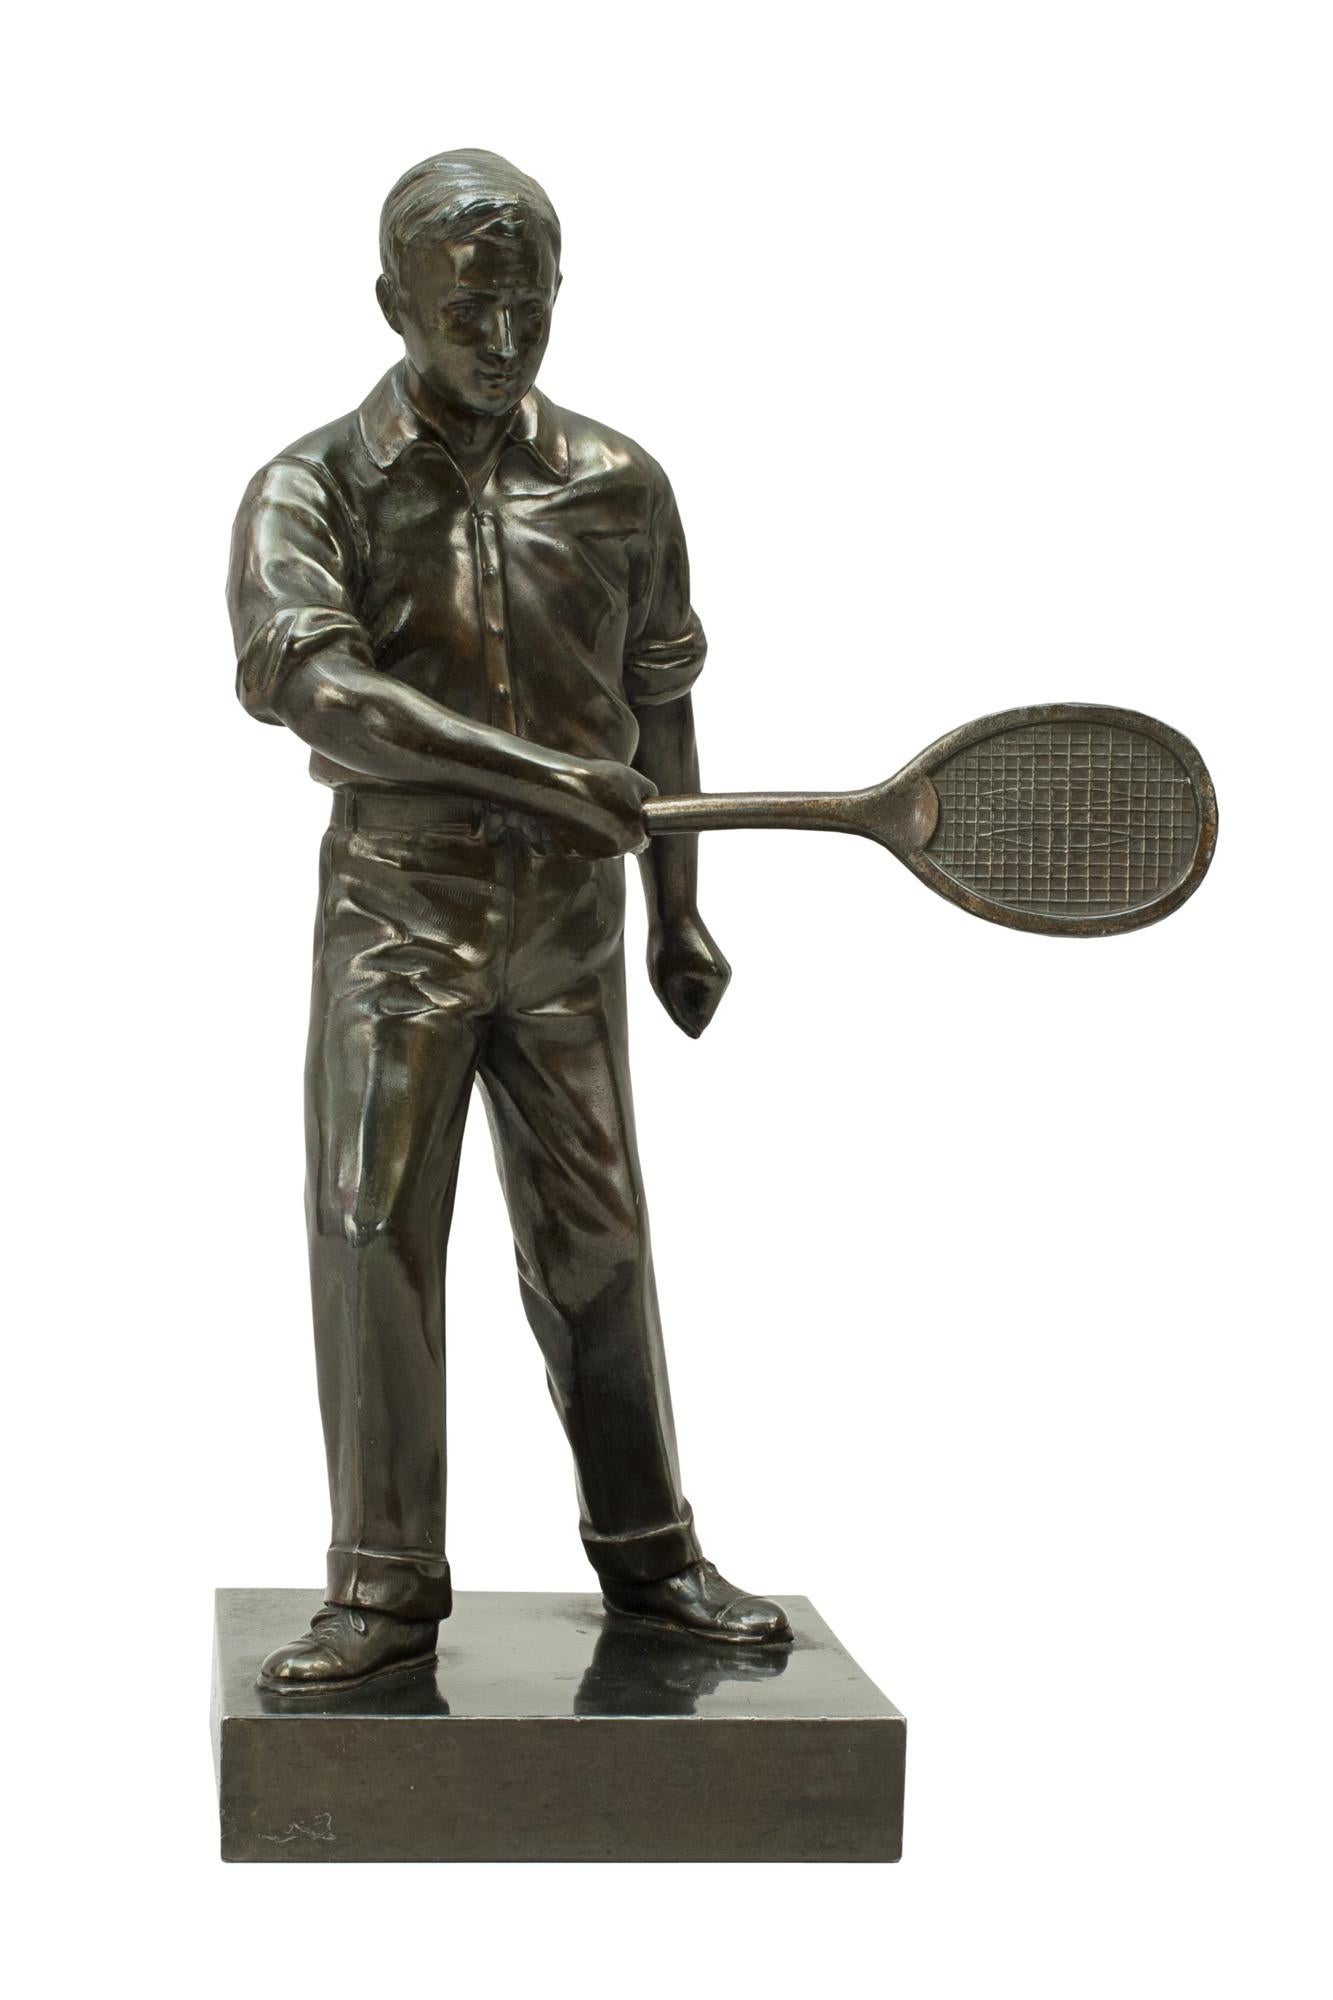 Spelter tennis players, Doherty twins.
A pair of bronzed Art Deco lawn tennis figures perhaps portraying the Doherty twins, Reginald and Lawrence. The figures are made from spelter (a white metal alloy cast in the lost wax process) and are on